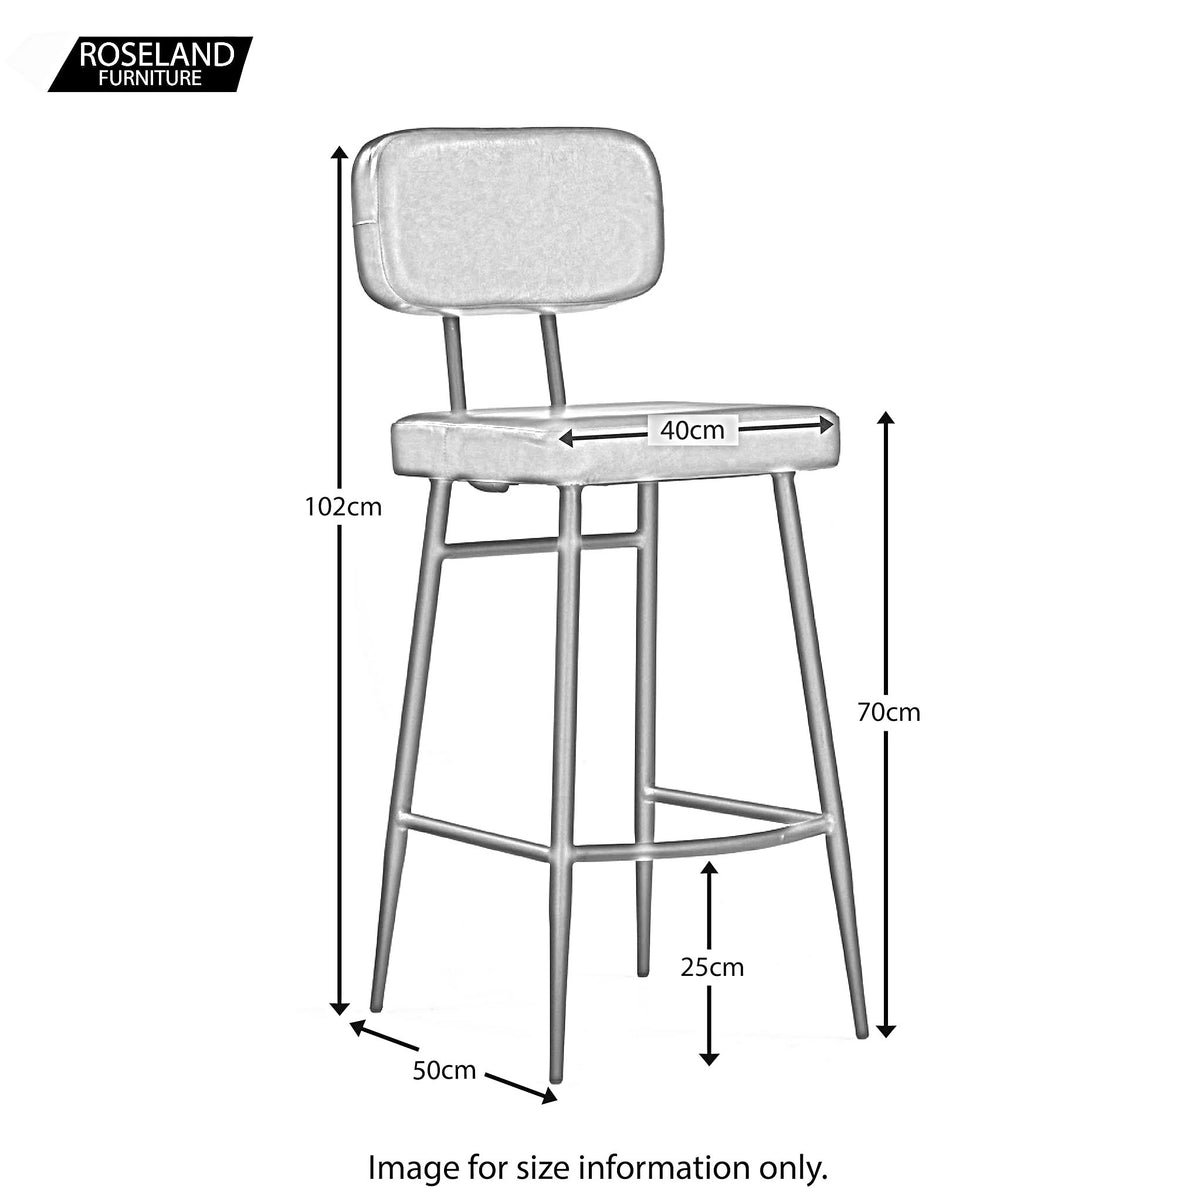 Hulta Grey Leather Stool - Size Guide